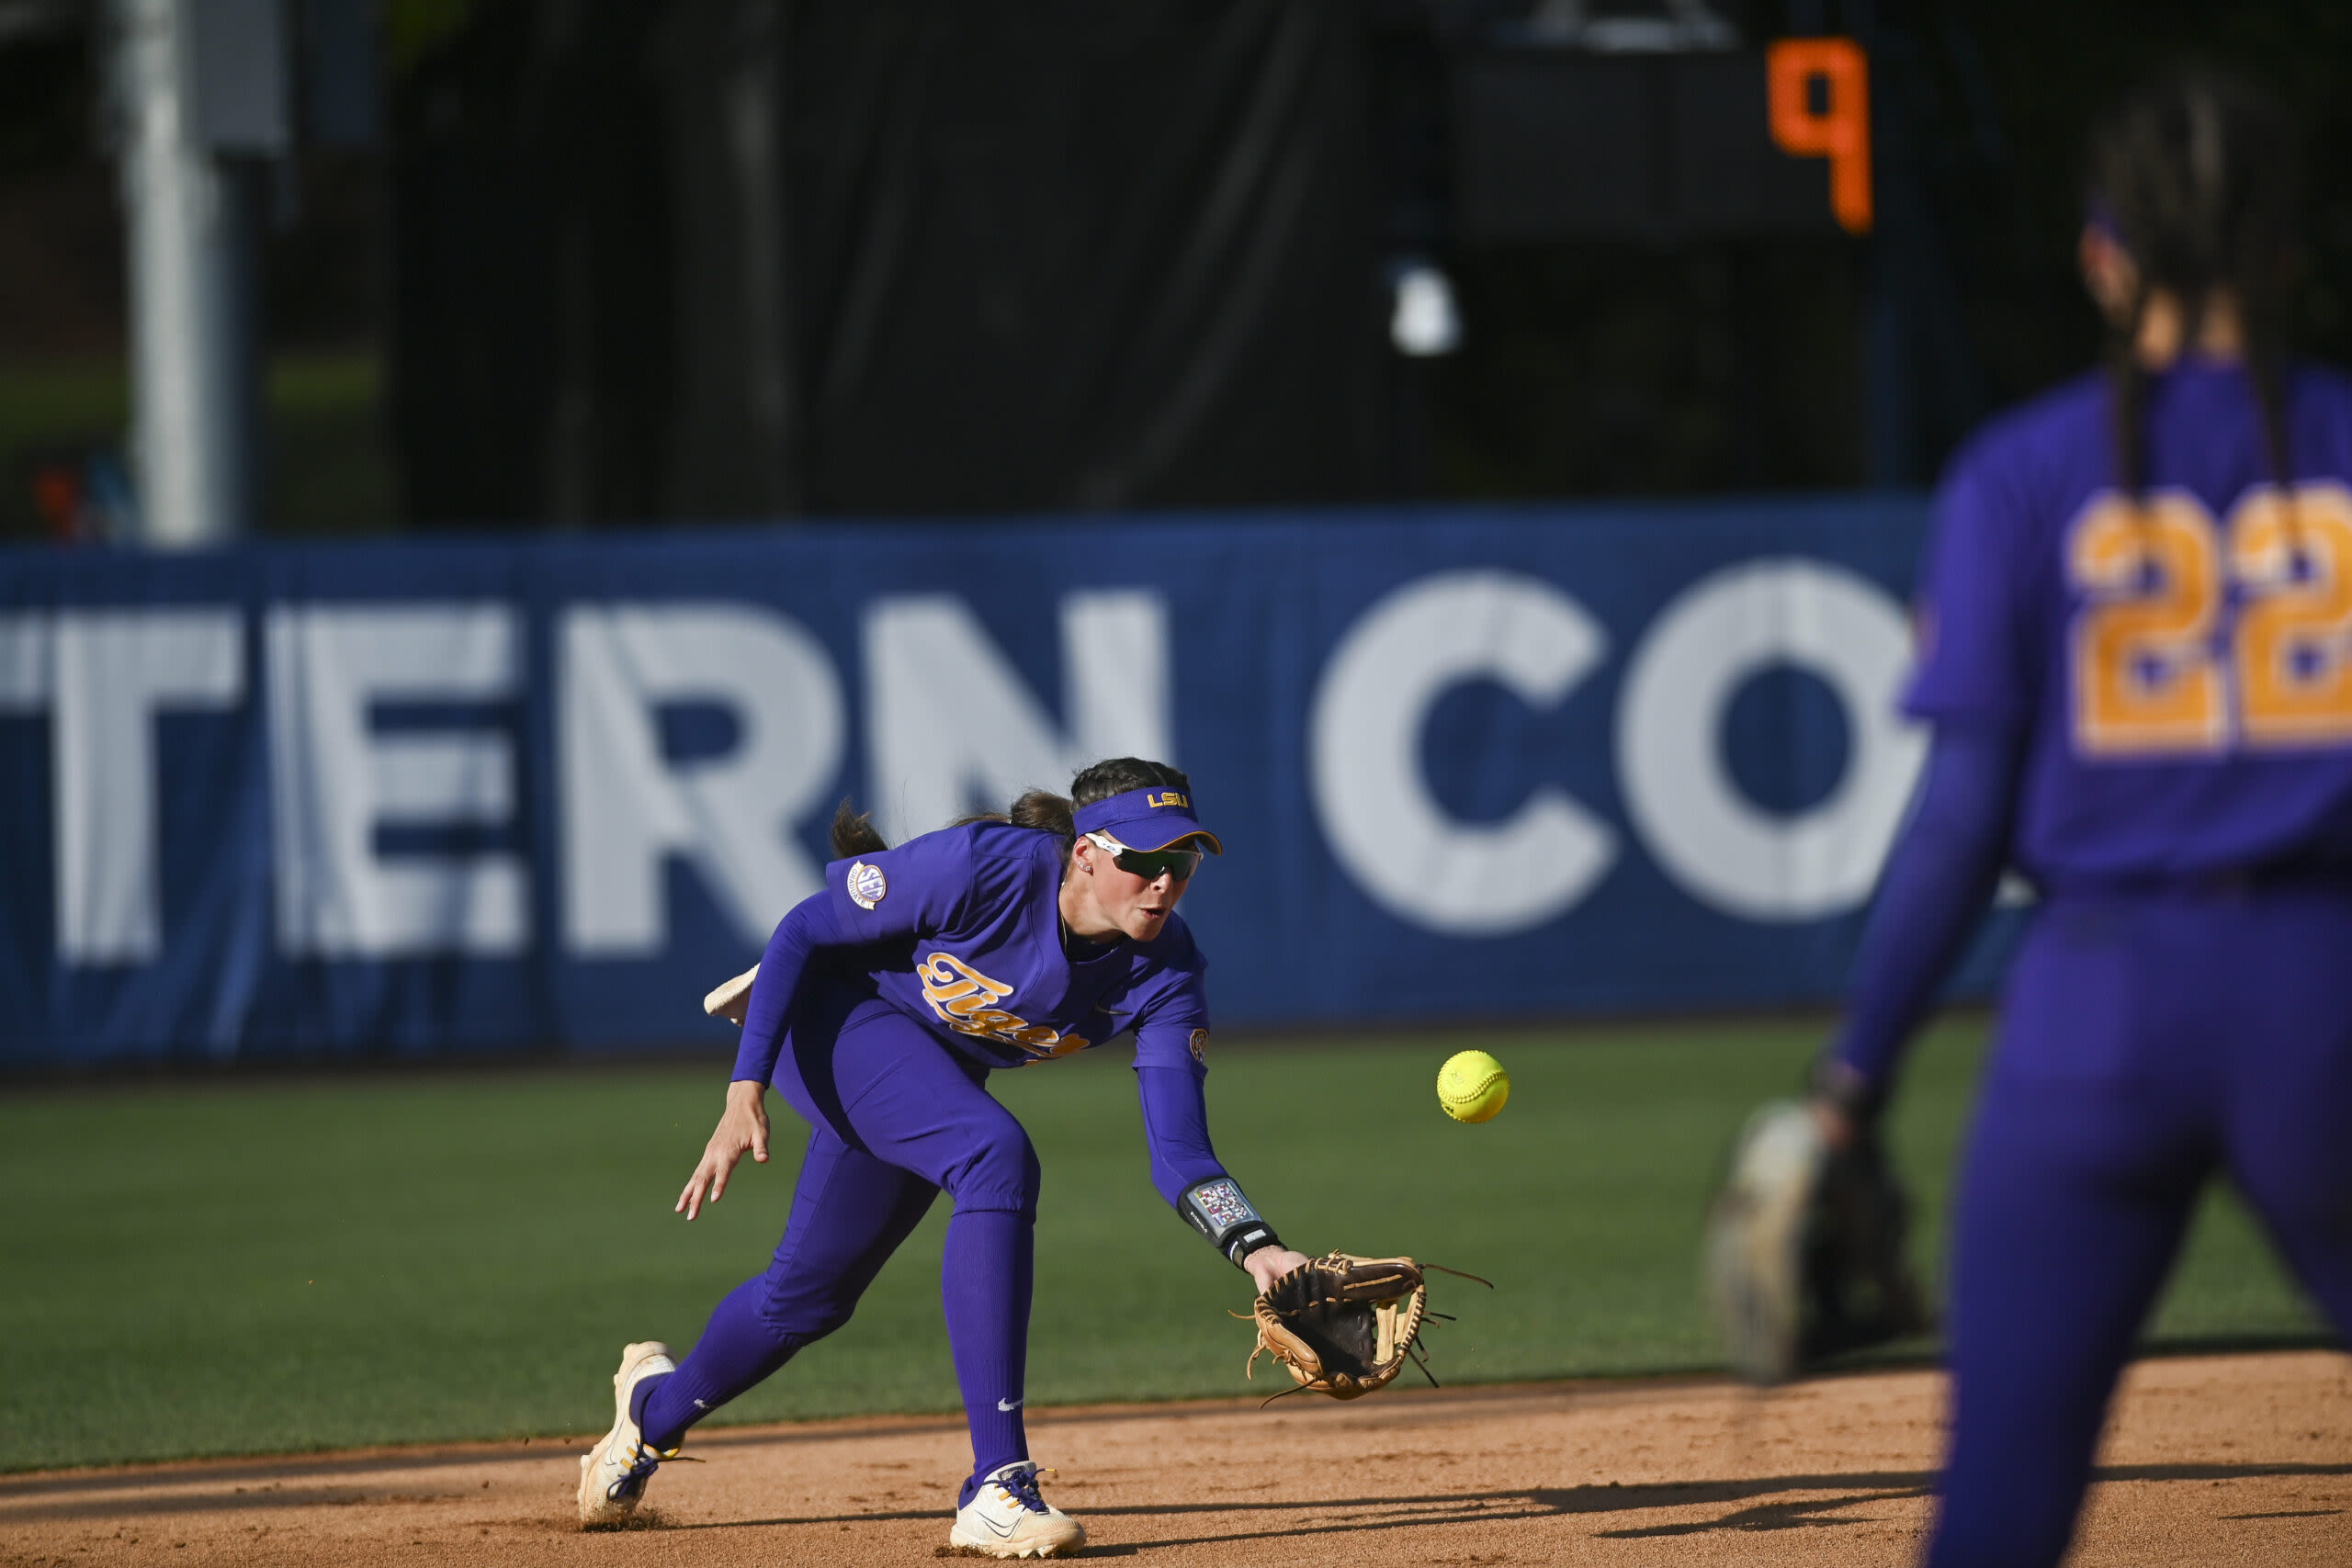 LSU softball drops a spot in latest national rankings after SEC tournament